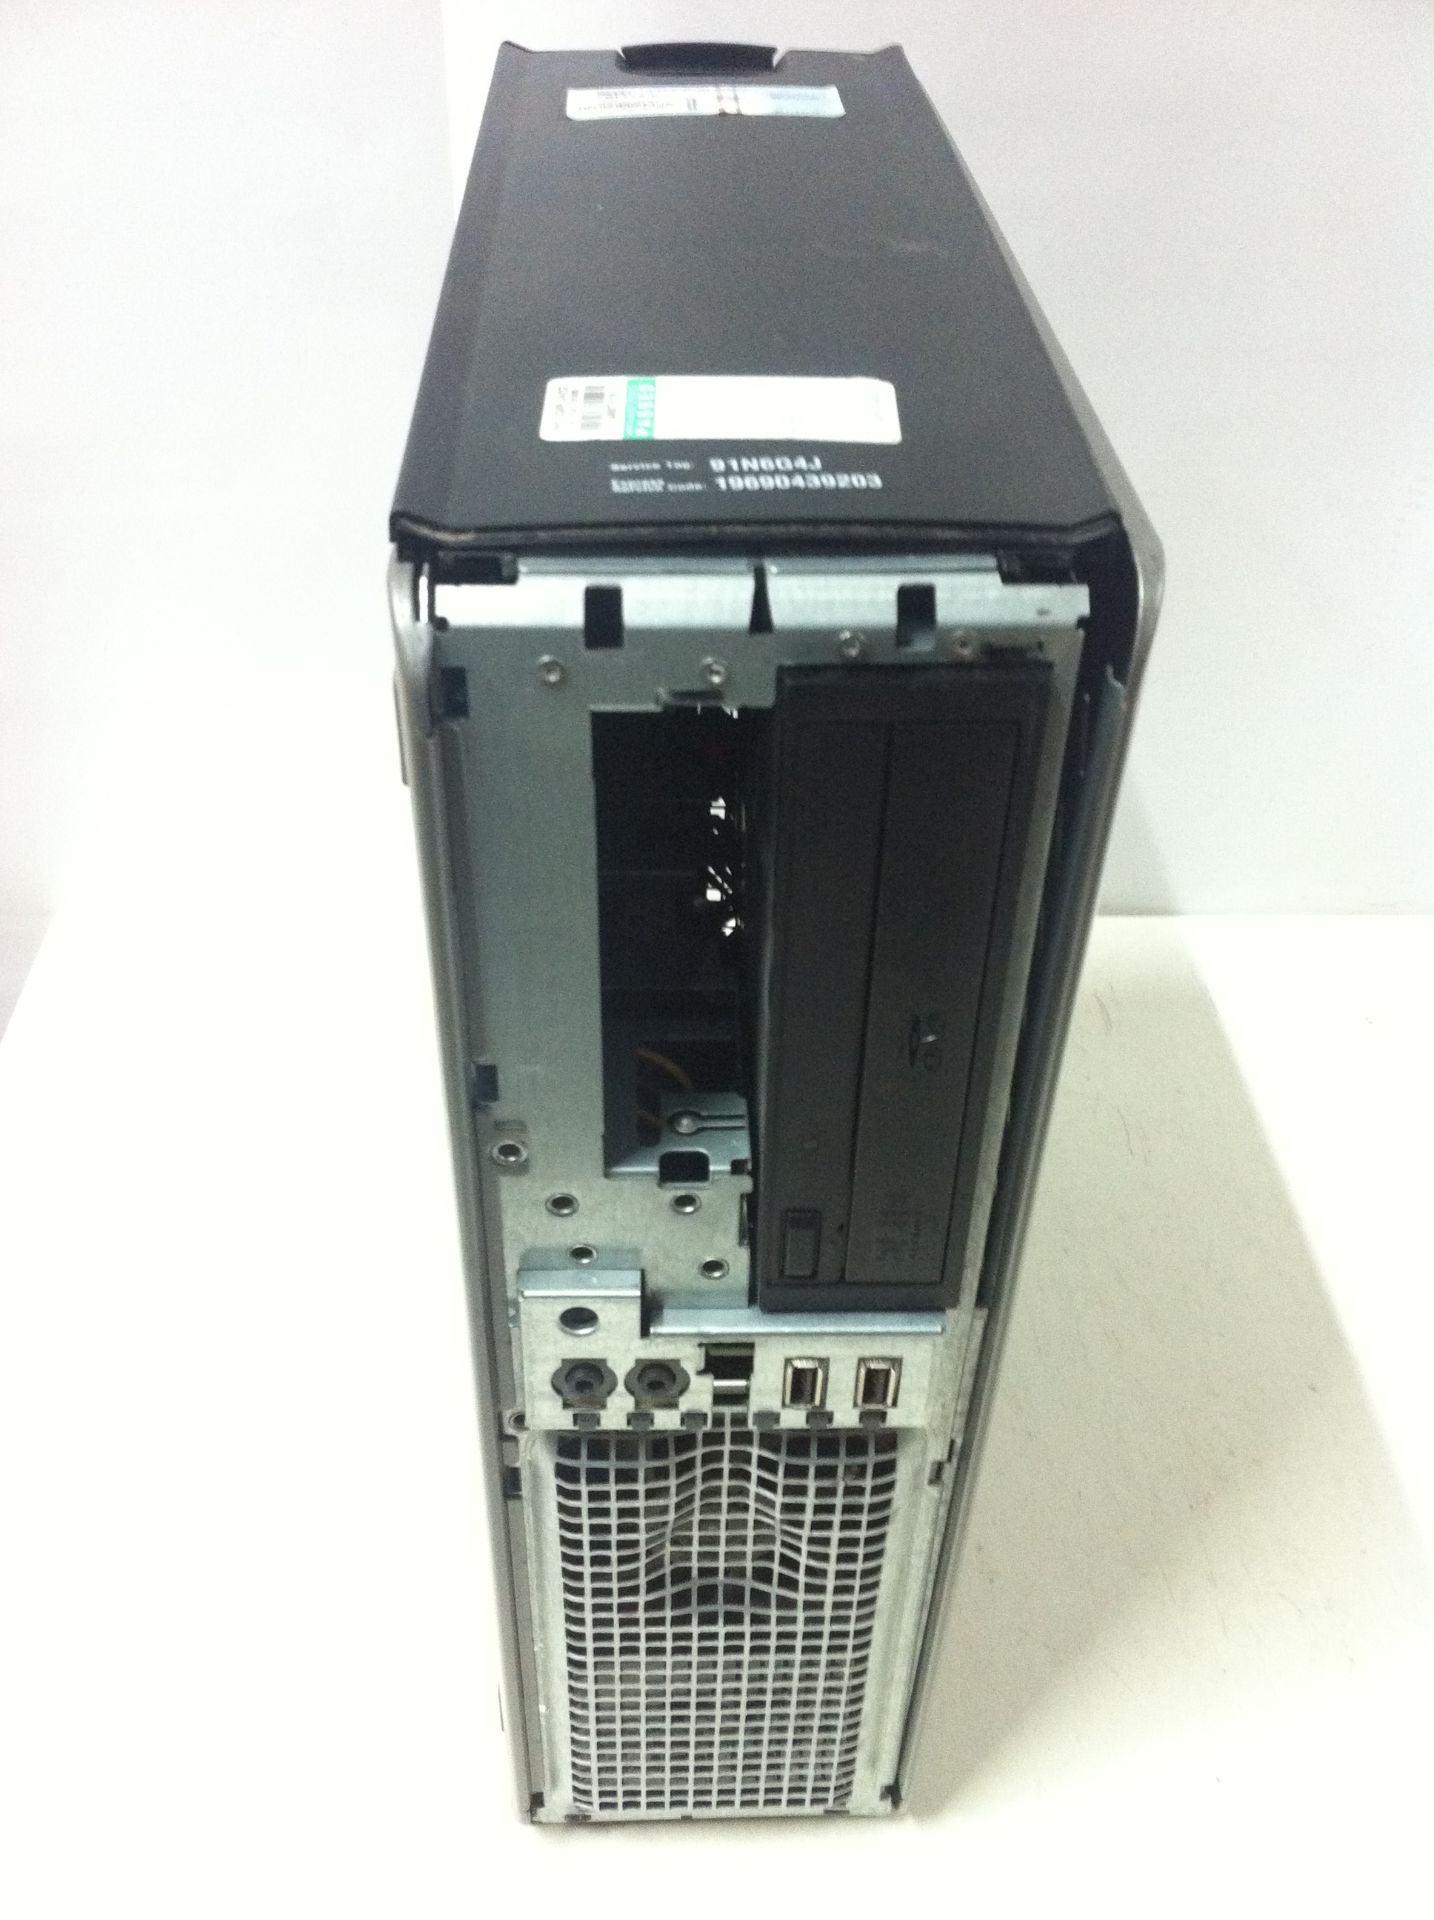 6 x Dell Desktop PC's. See description for specification. - Image 2 of 7